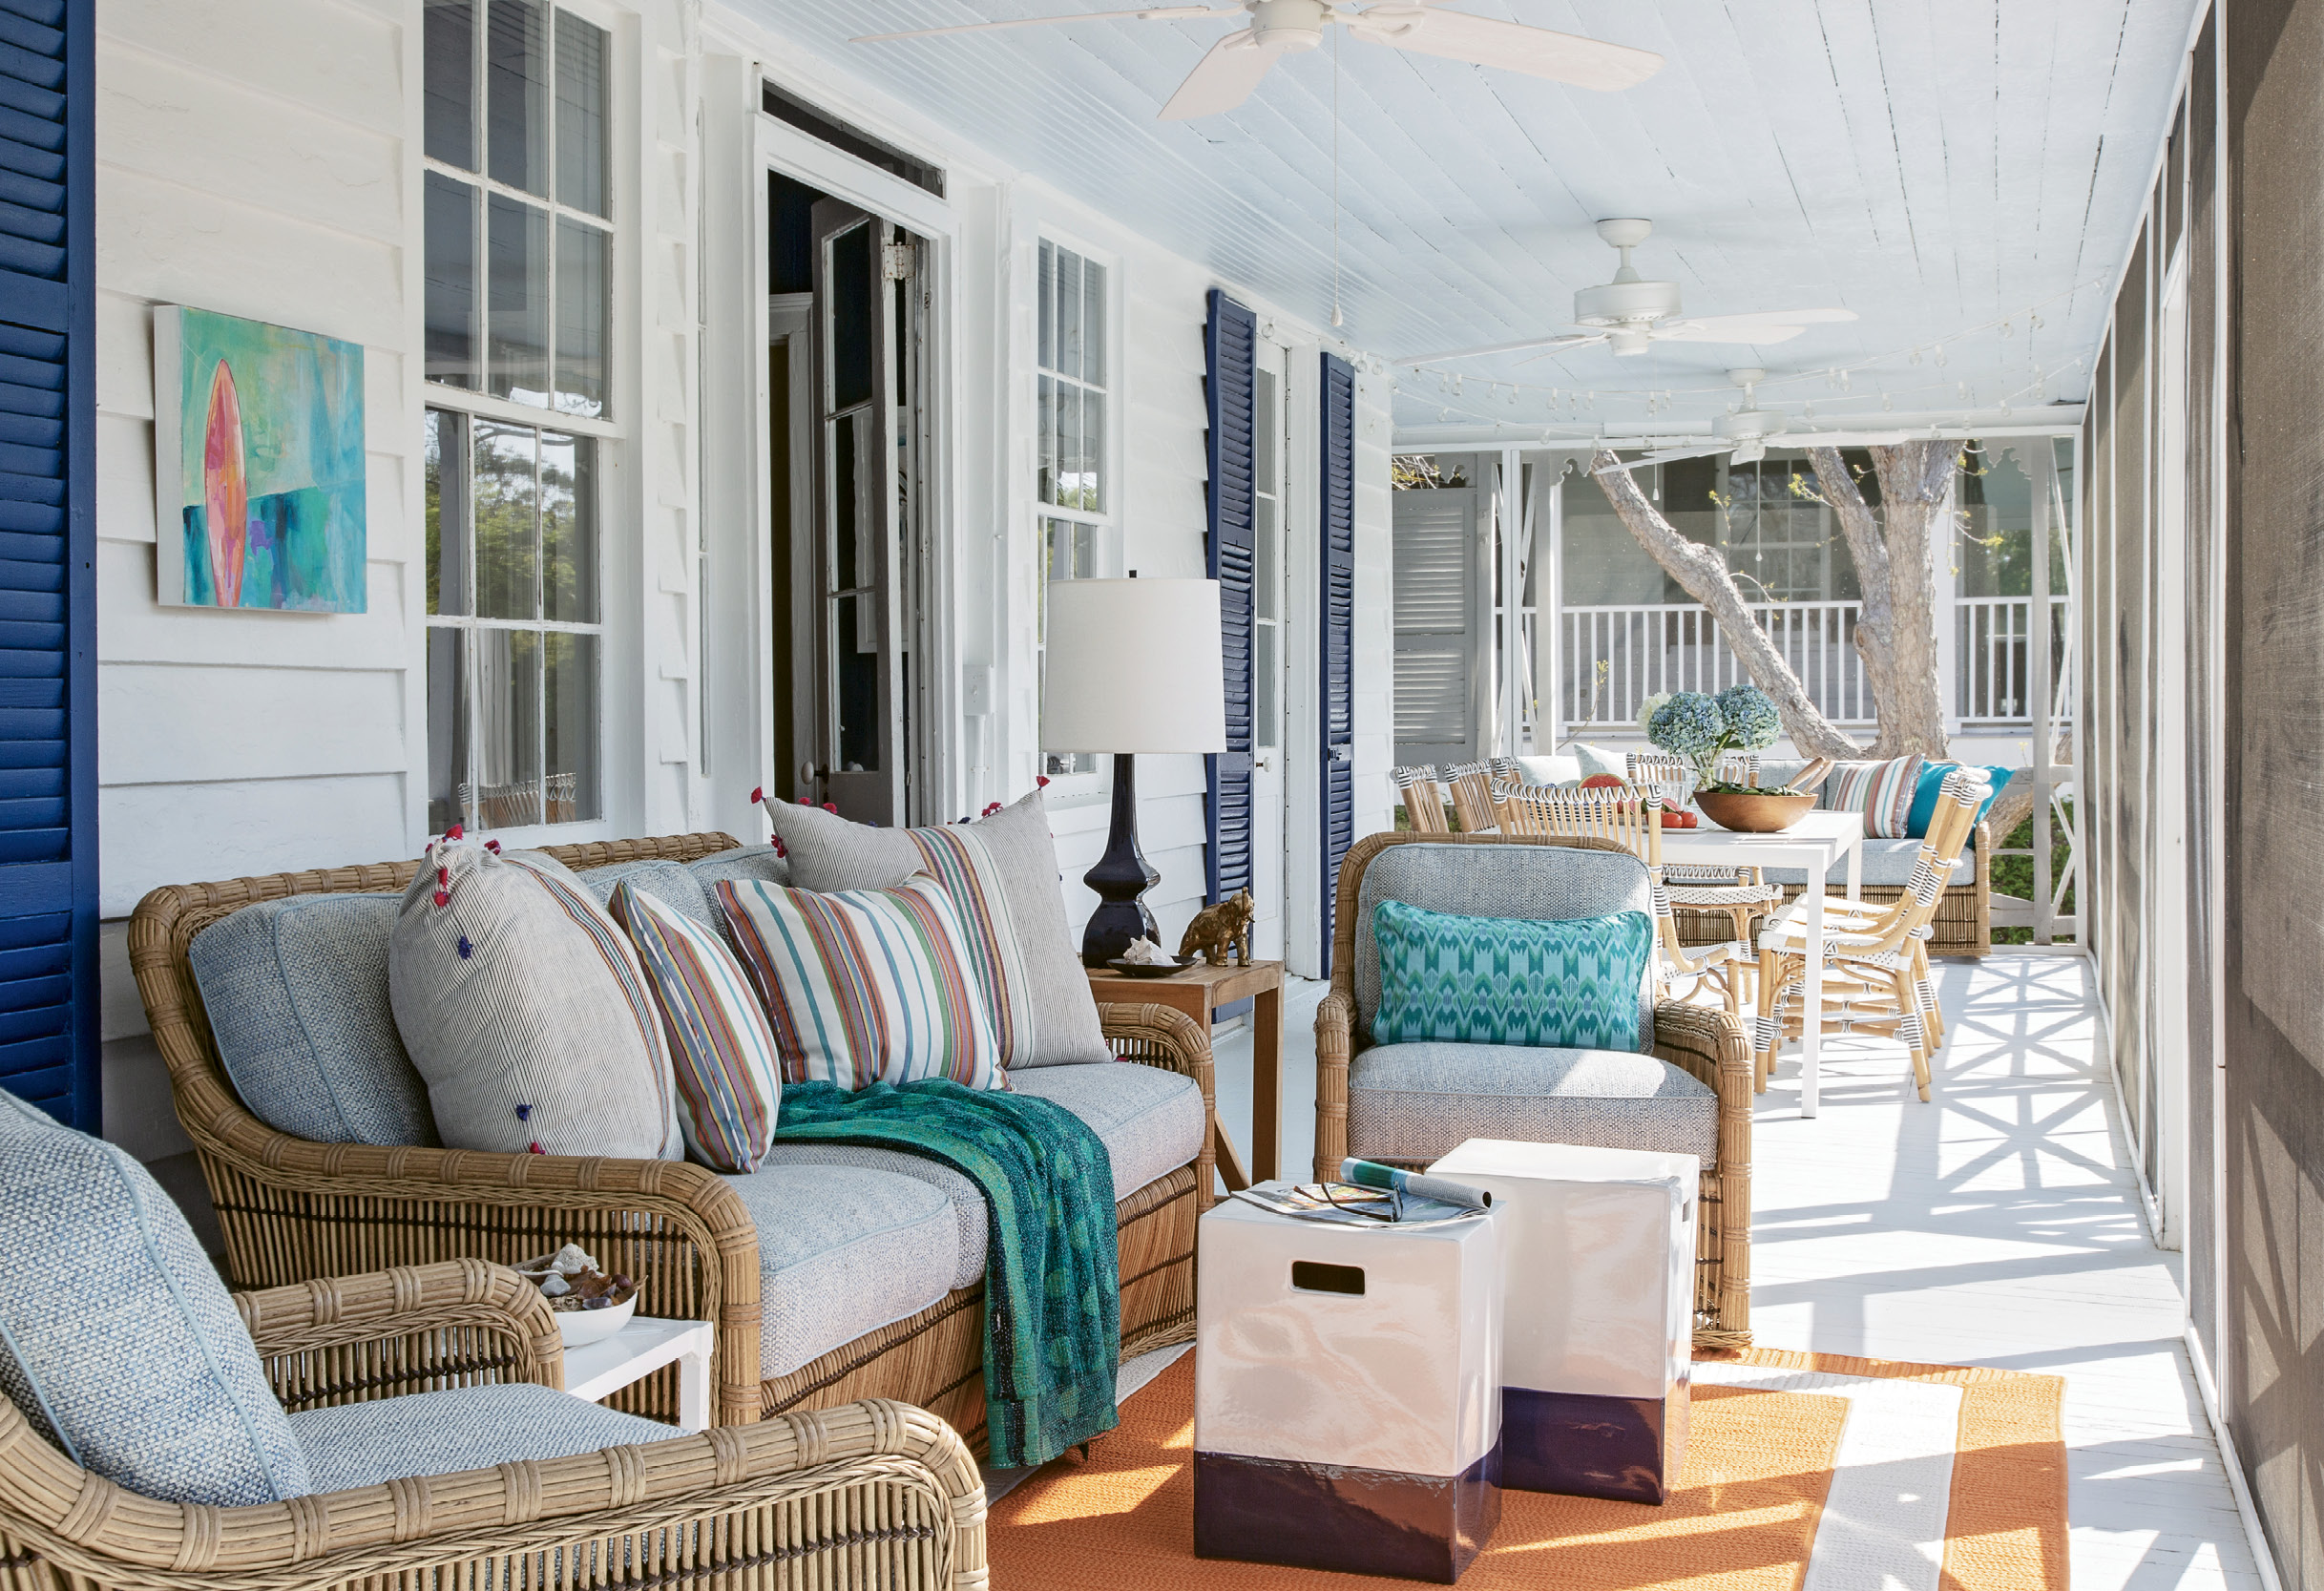 Designed for the Elements: The large porch runs the length of the home, providing a dining space for 10 as well as an outdoor living area, furnished with seating from Lane Venture and pillows from Candelabra.